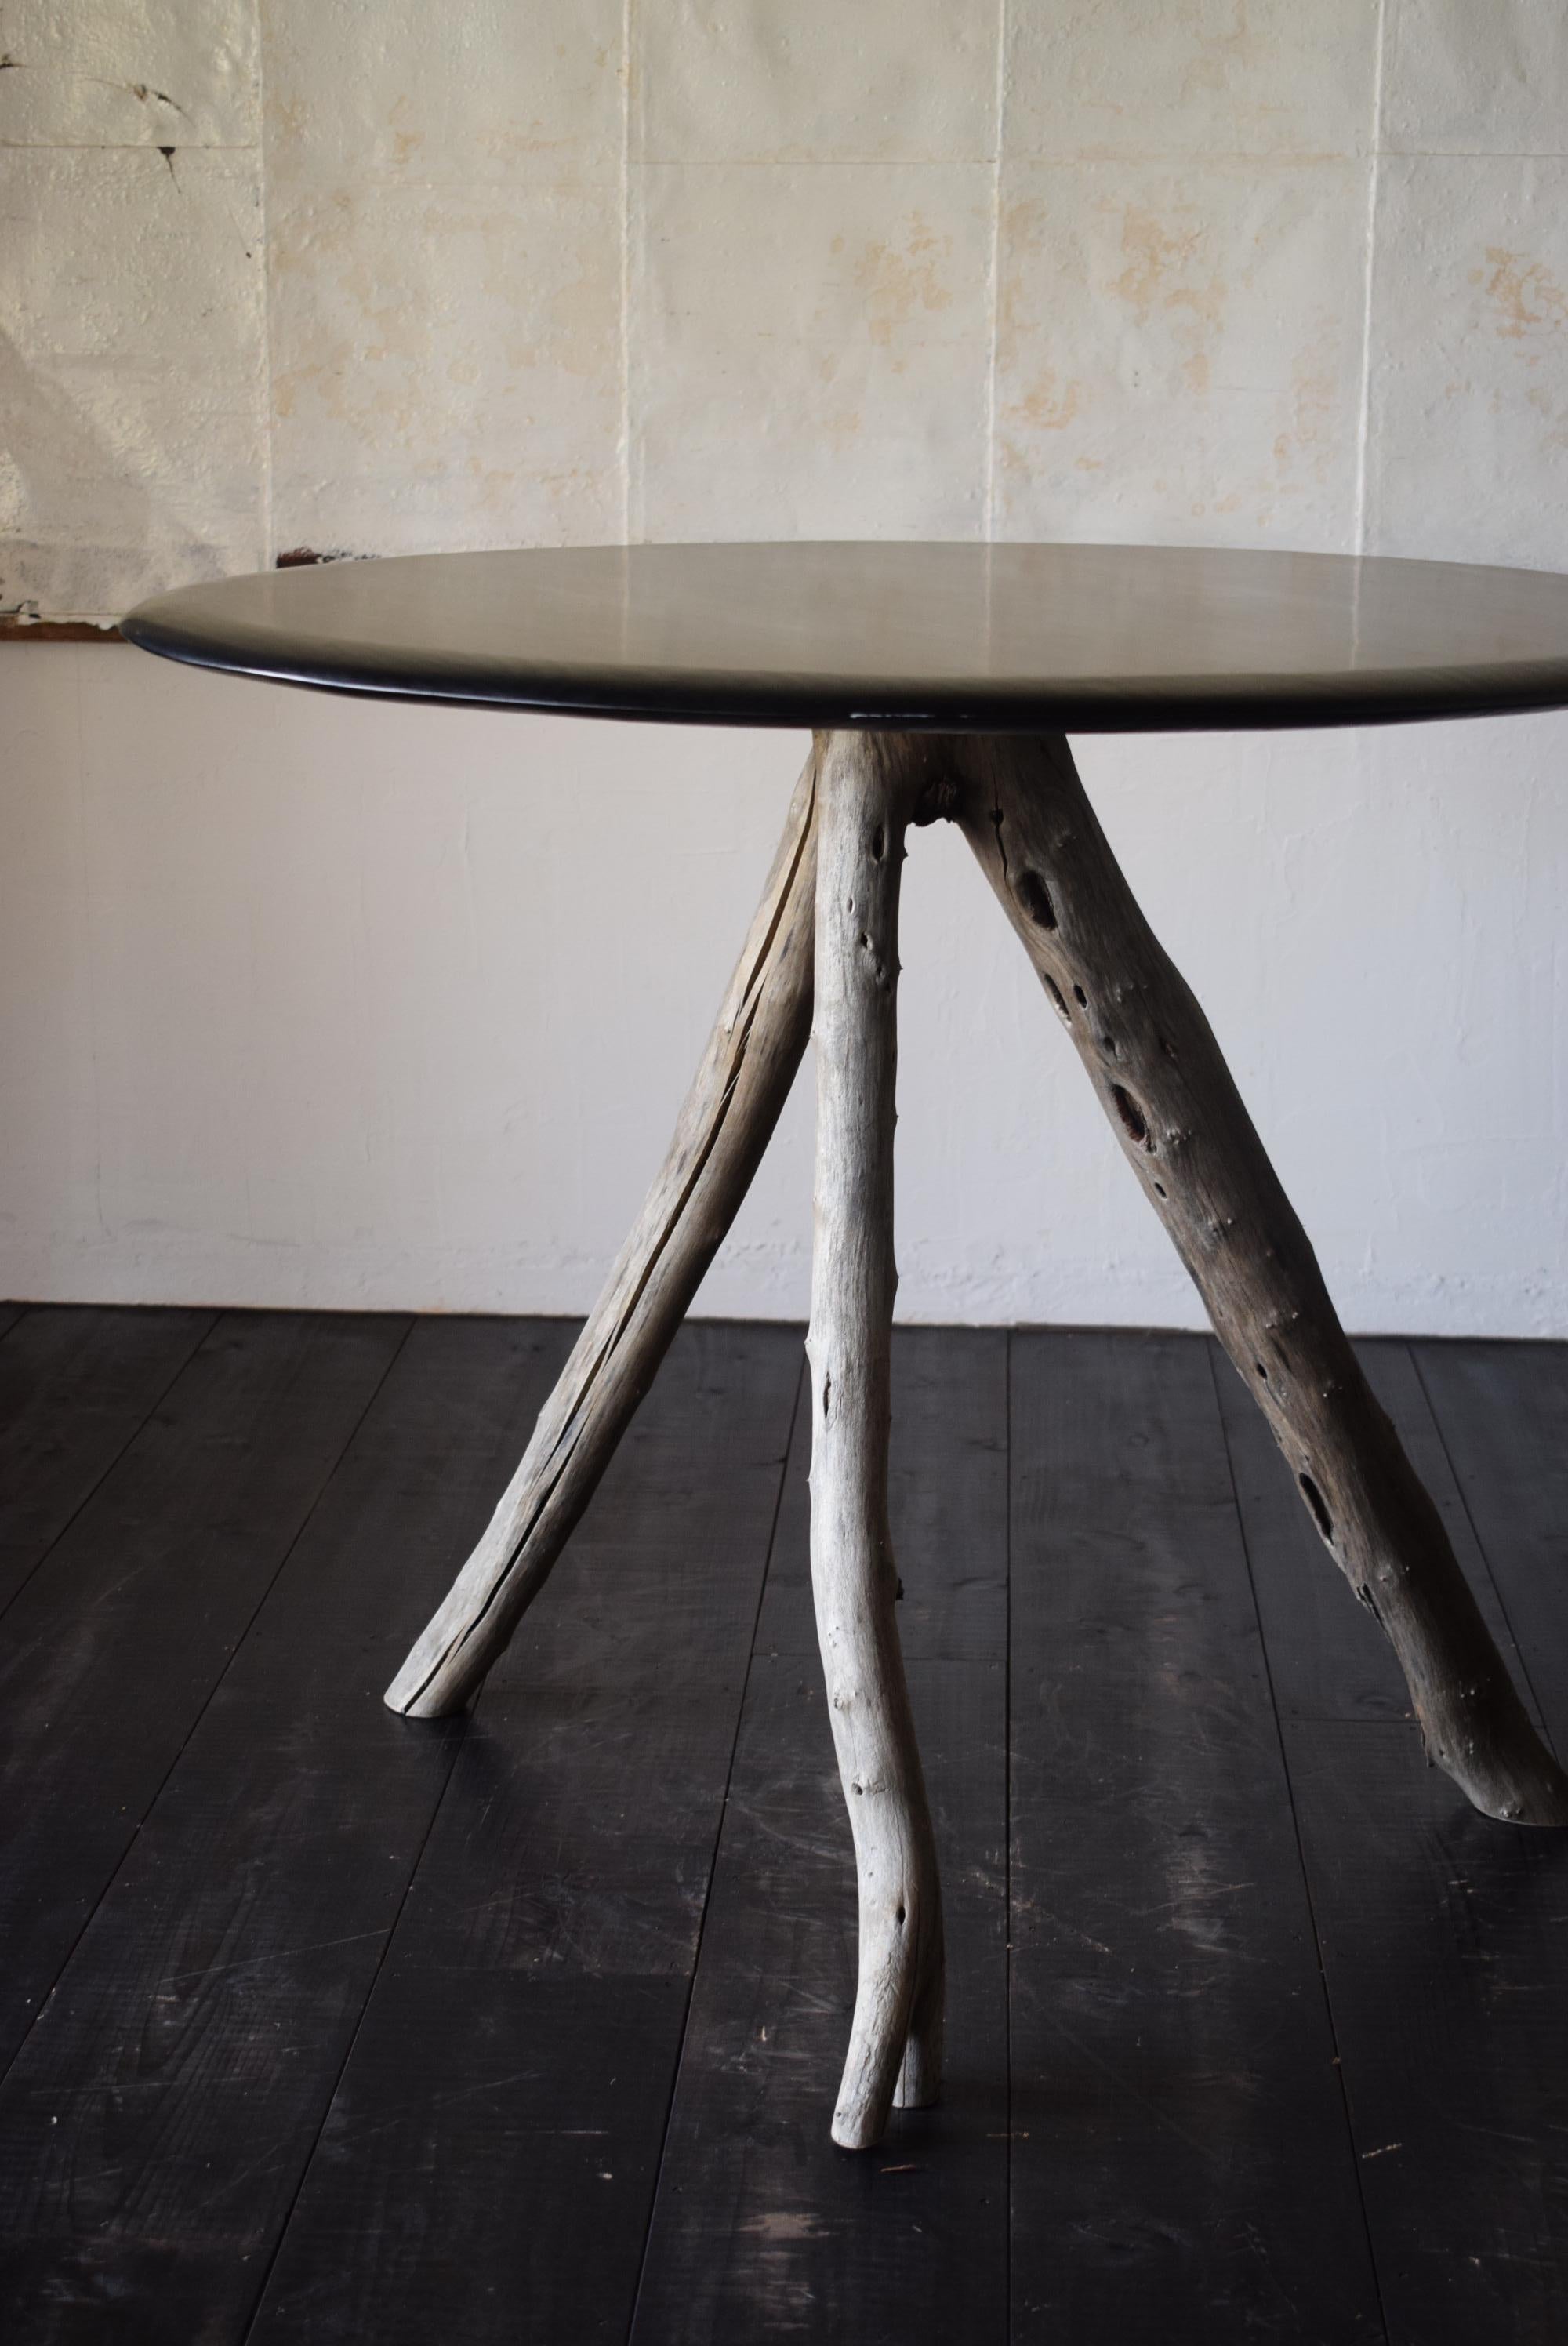 Wood Japanese Driftwood Table /Exhibition Table / Flower Stand /Wabisabi Table